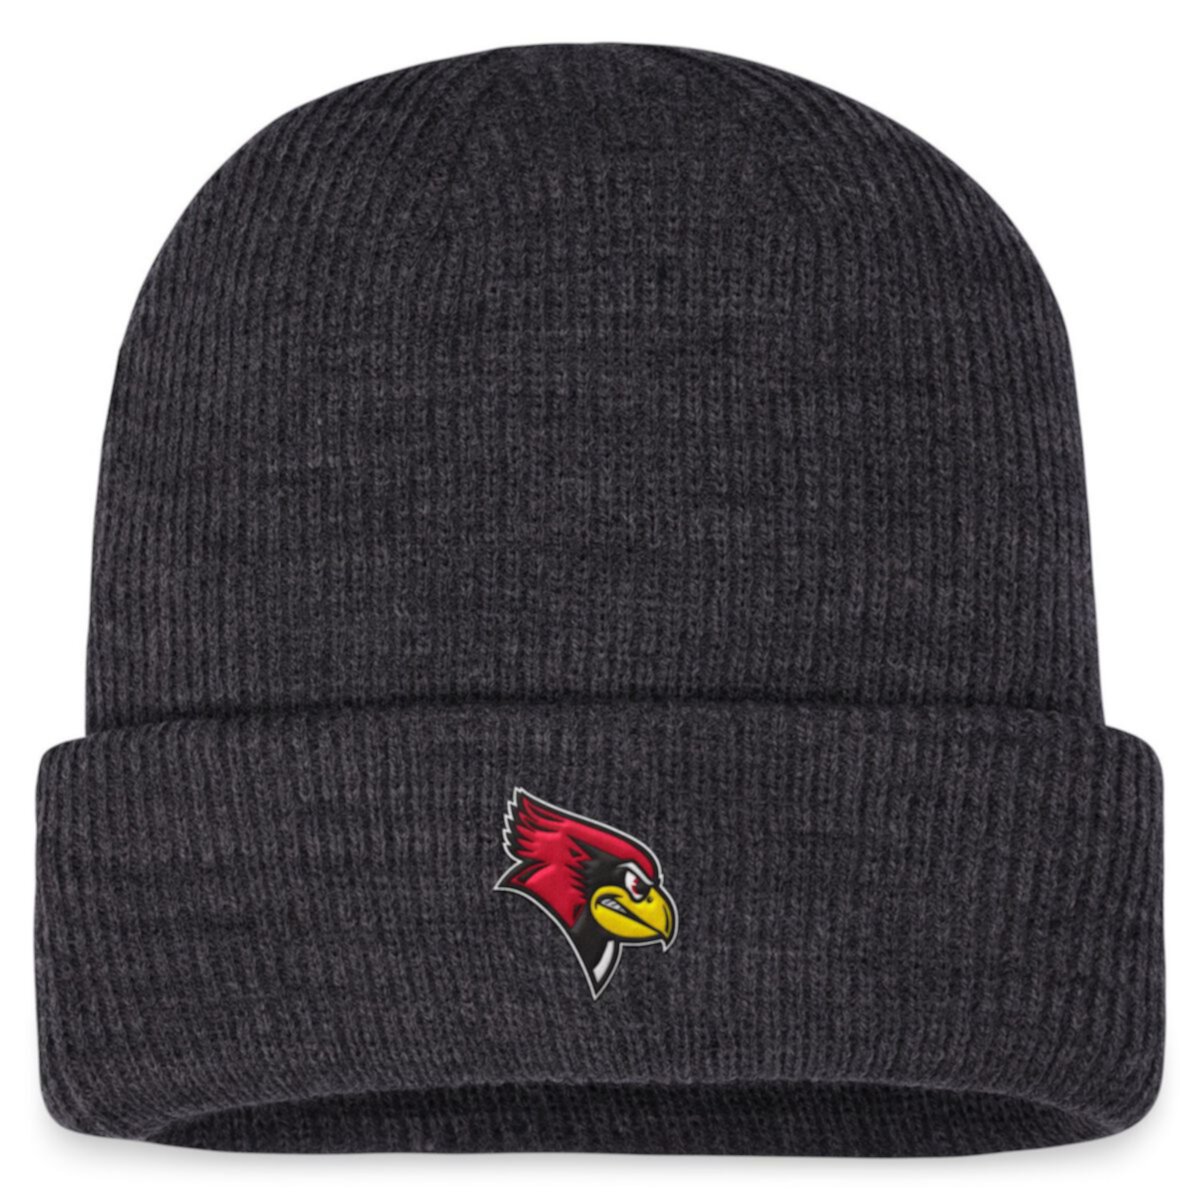 Men's Top of the World Charcoal Illinois State Redbirds Sheer Cuffed Knit Hat Top of the World